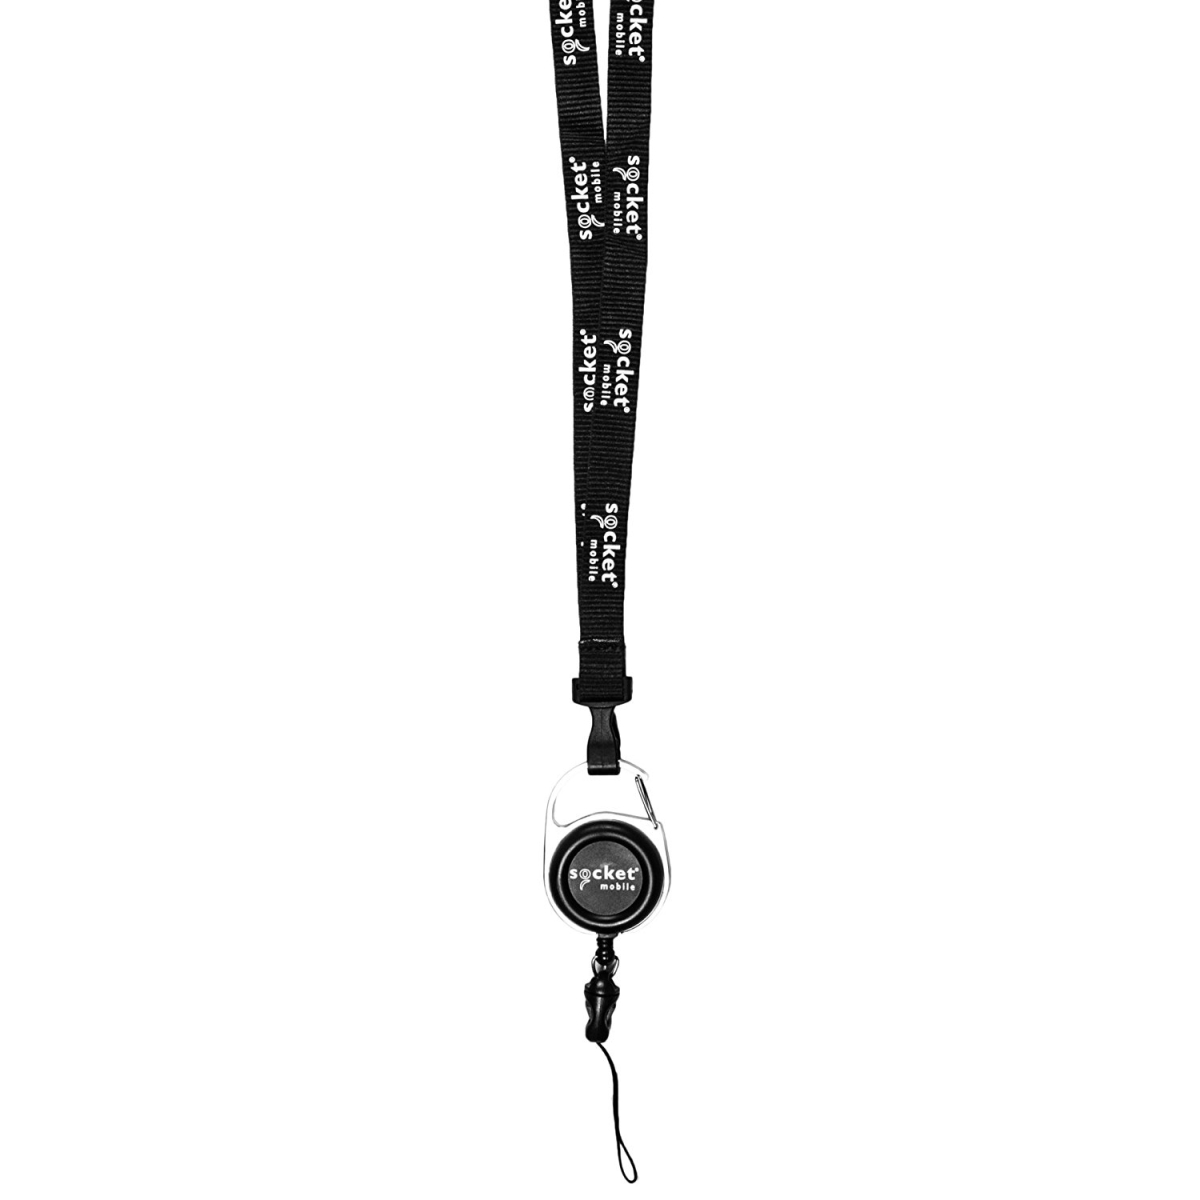 Socket Mobile - Accessories Ac4100-1692 Durable Lanyard With Retractable Pull Reel